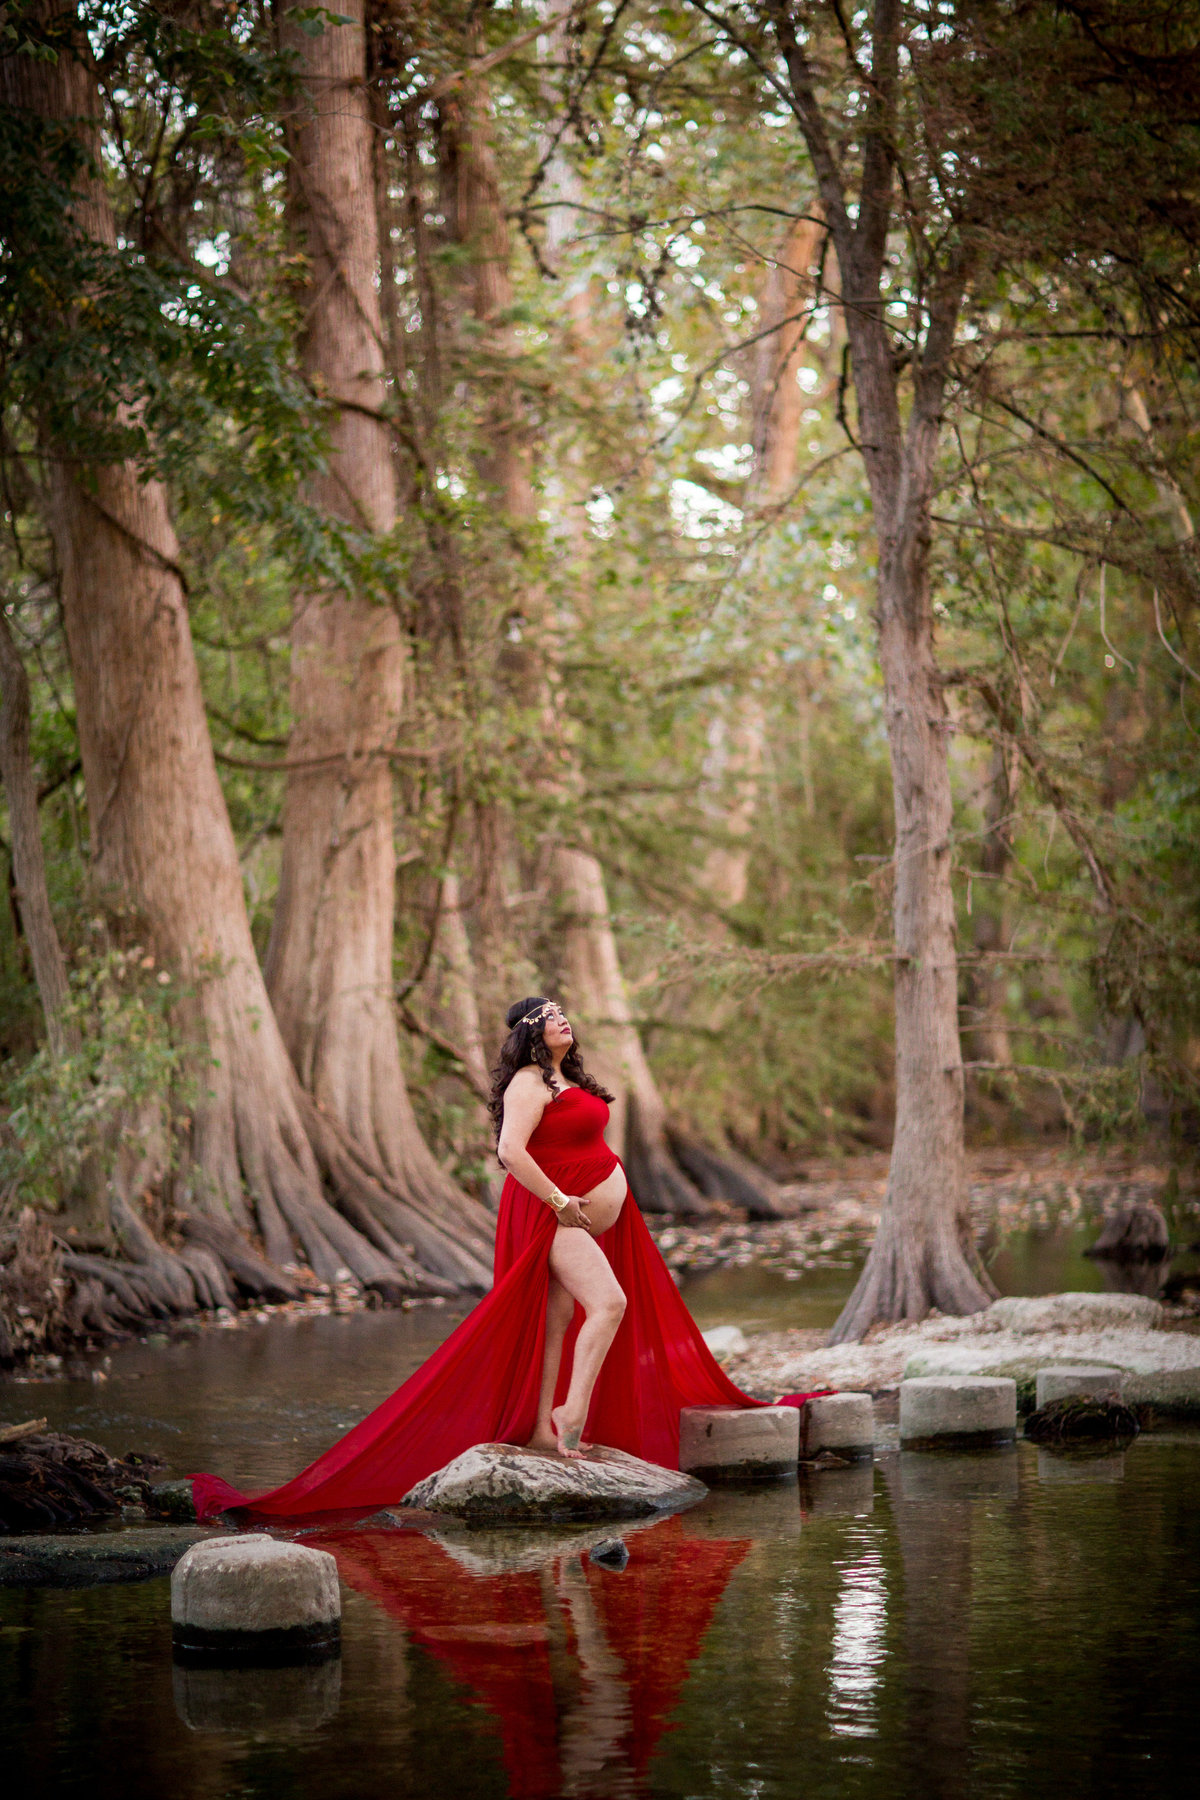 Maternity picture of pregnant woman in red dress holding baby belly and standing in a river.